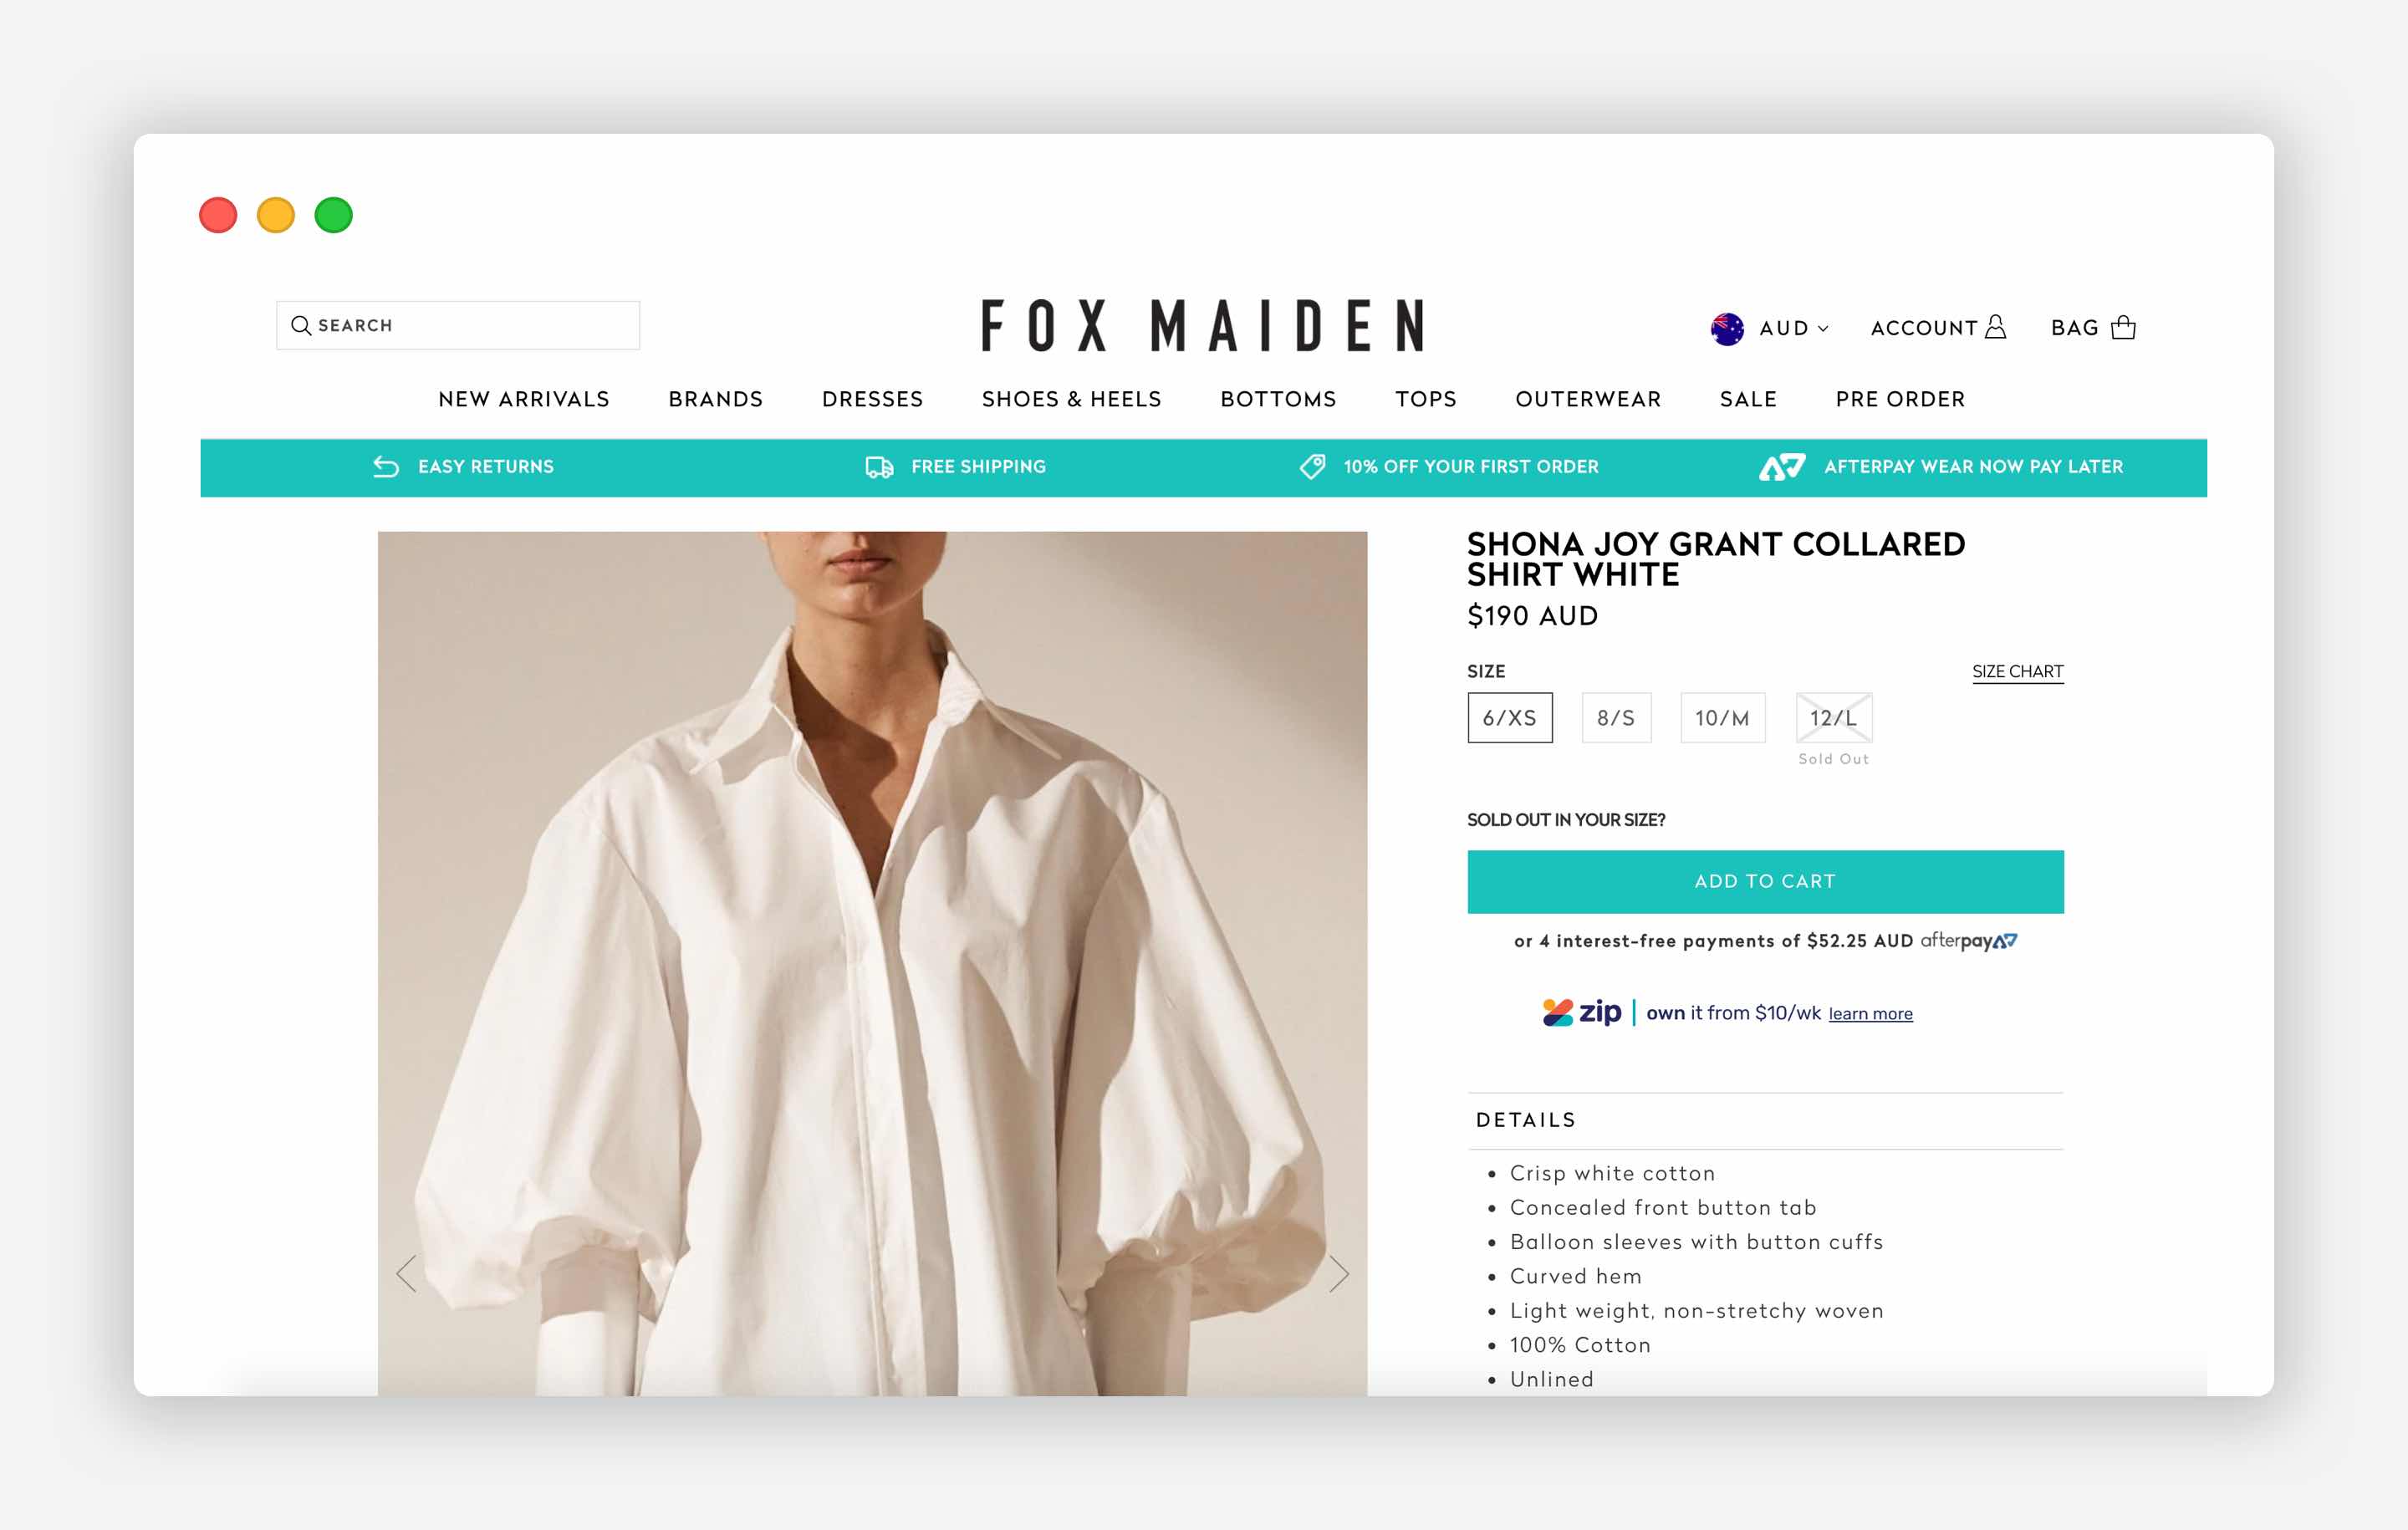 Returns and Refunds deatils on the product page. The Fox Maiden example